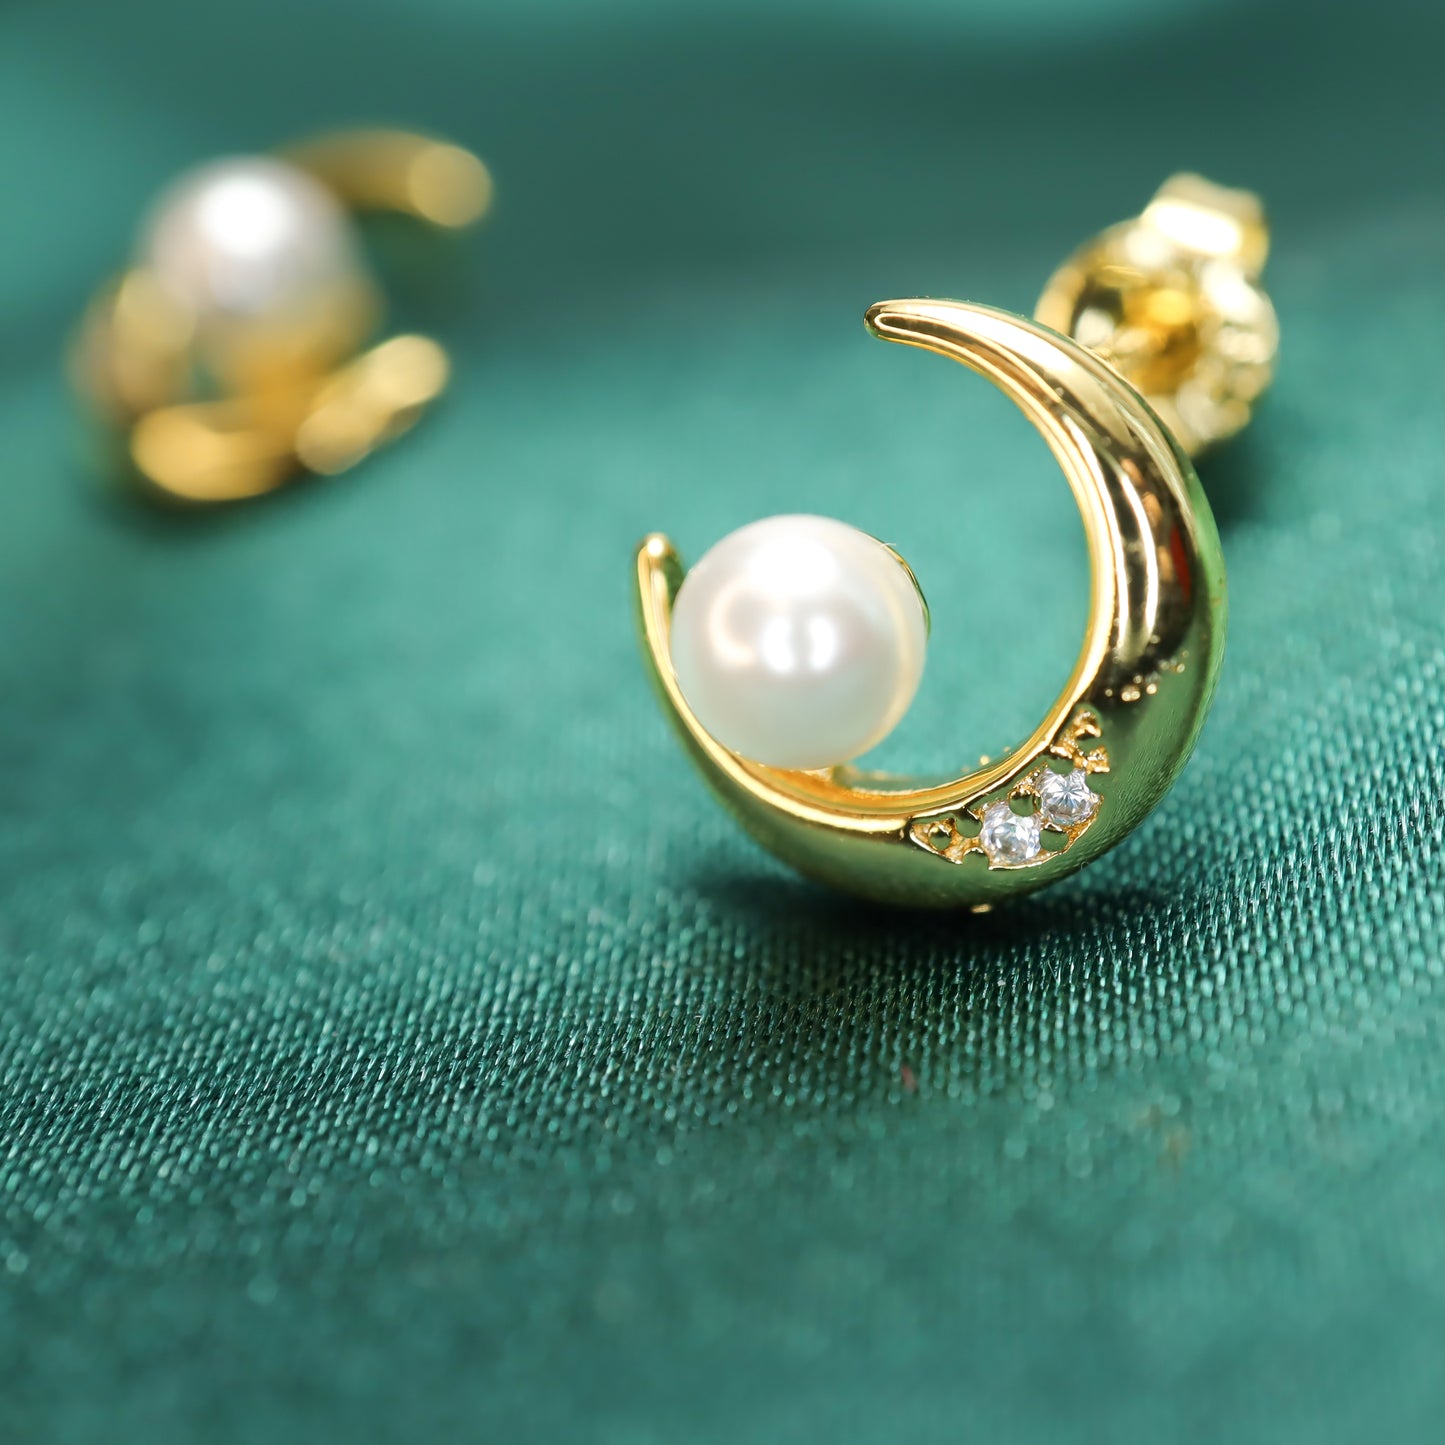 French Chic Pearl Crescent Moon S925 Sterling Silver Stud Earrings